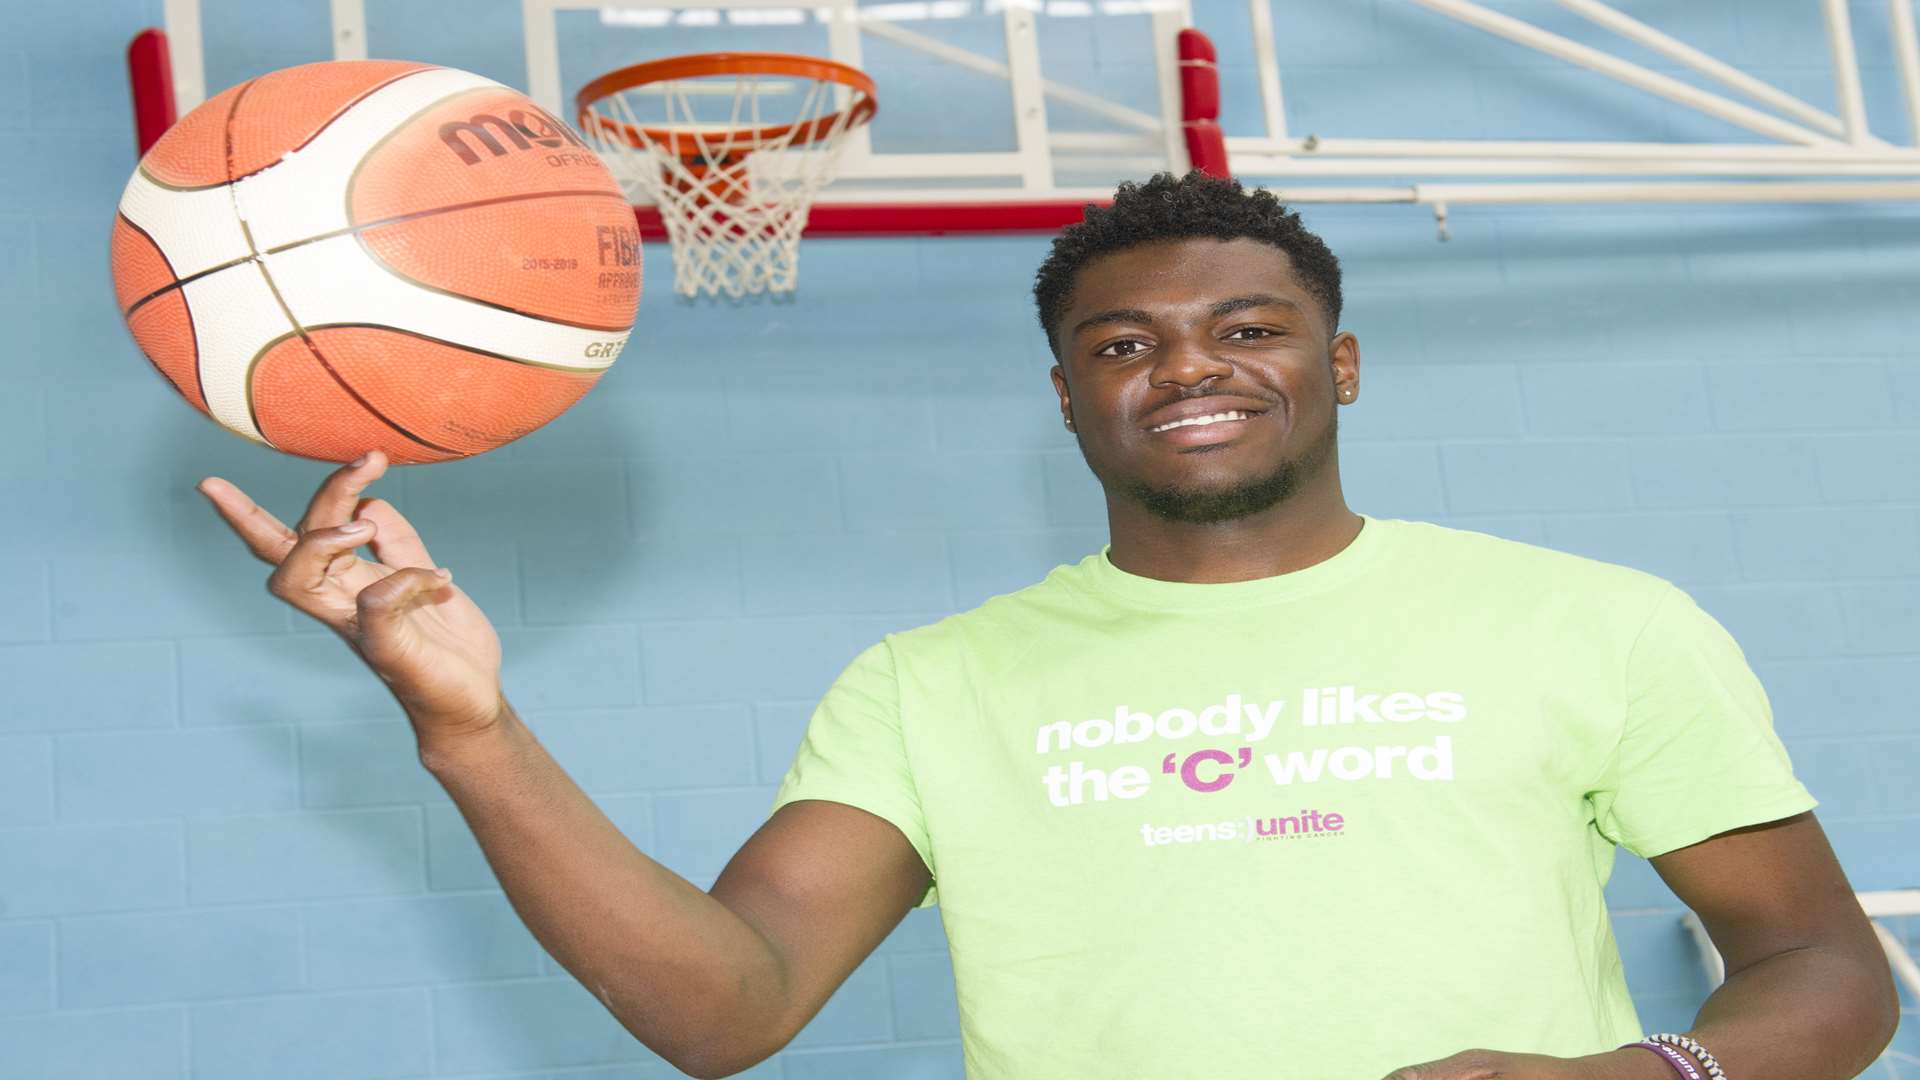 North Kent College's 48 hours of uninterrupted exercise for charity. Rhys Abioye, playing basketball.